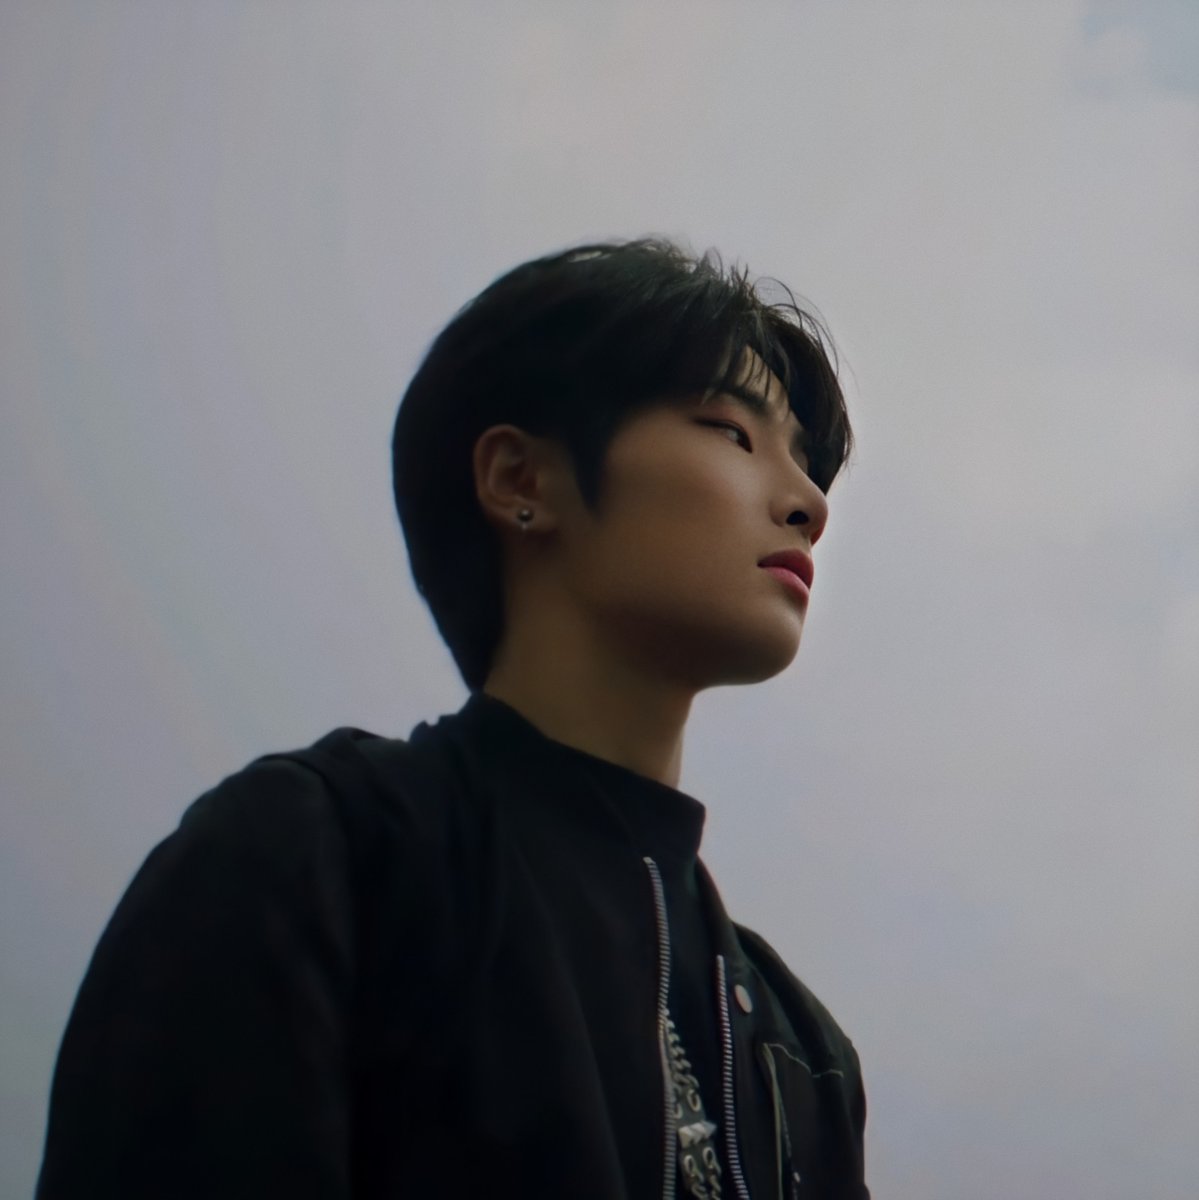 Photos from the trailer since i couldn't help it,, <3A thread; #StrayKids  #스트레이키즈 #GO生  #GOLIVE #StrayKidsComeback #YouMakeStrayKidsStay